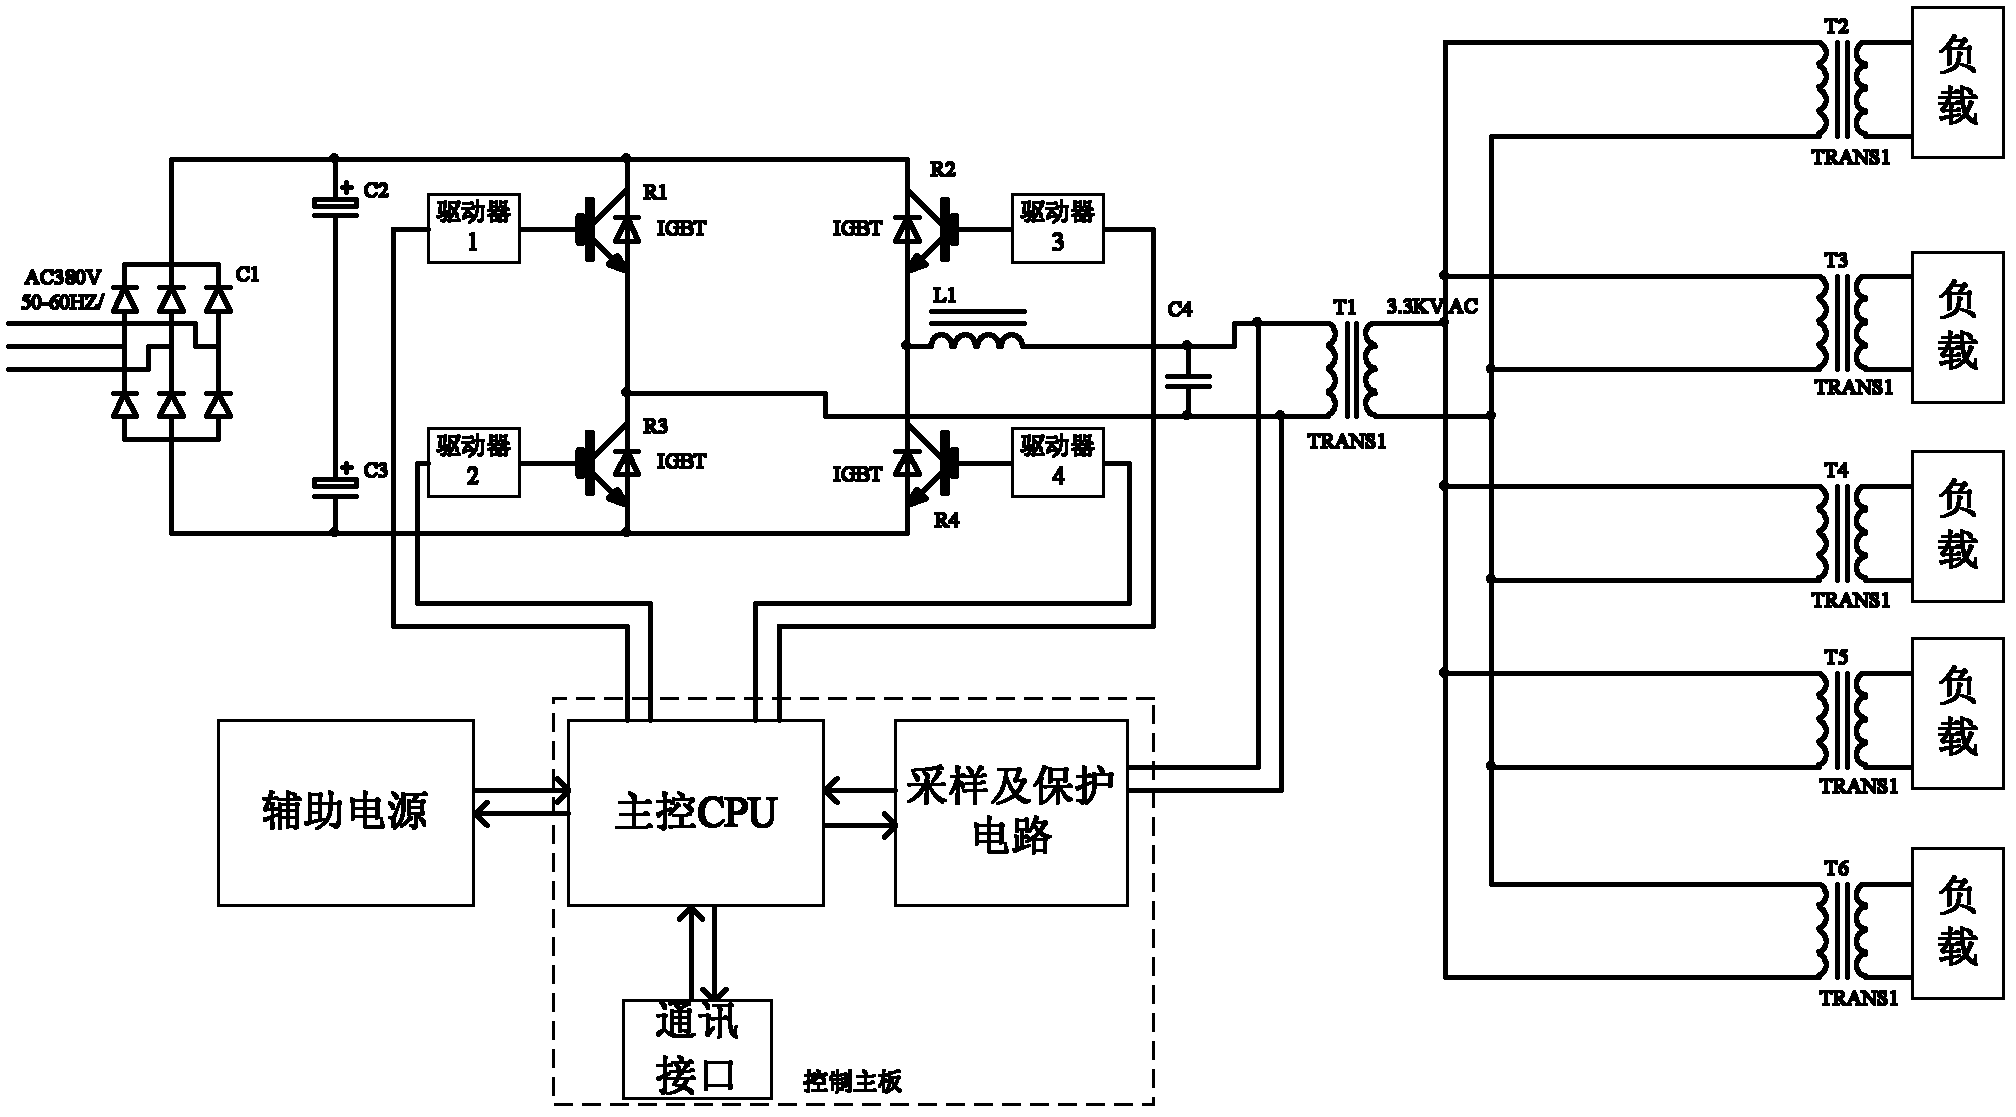 Single-phase 660V-3.3KV long-distance distributed direct power supply system